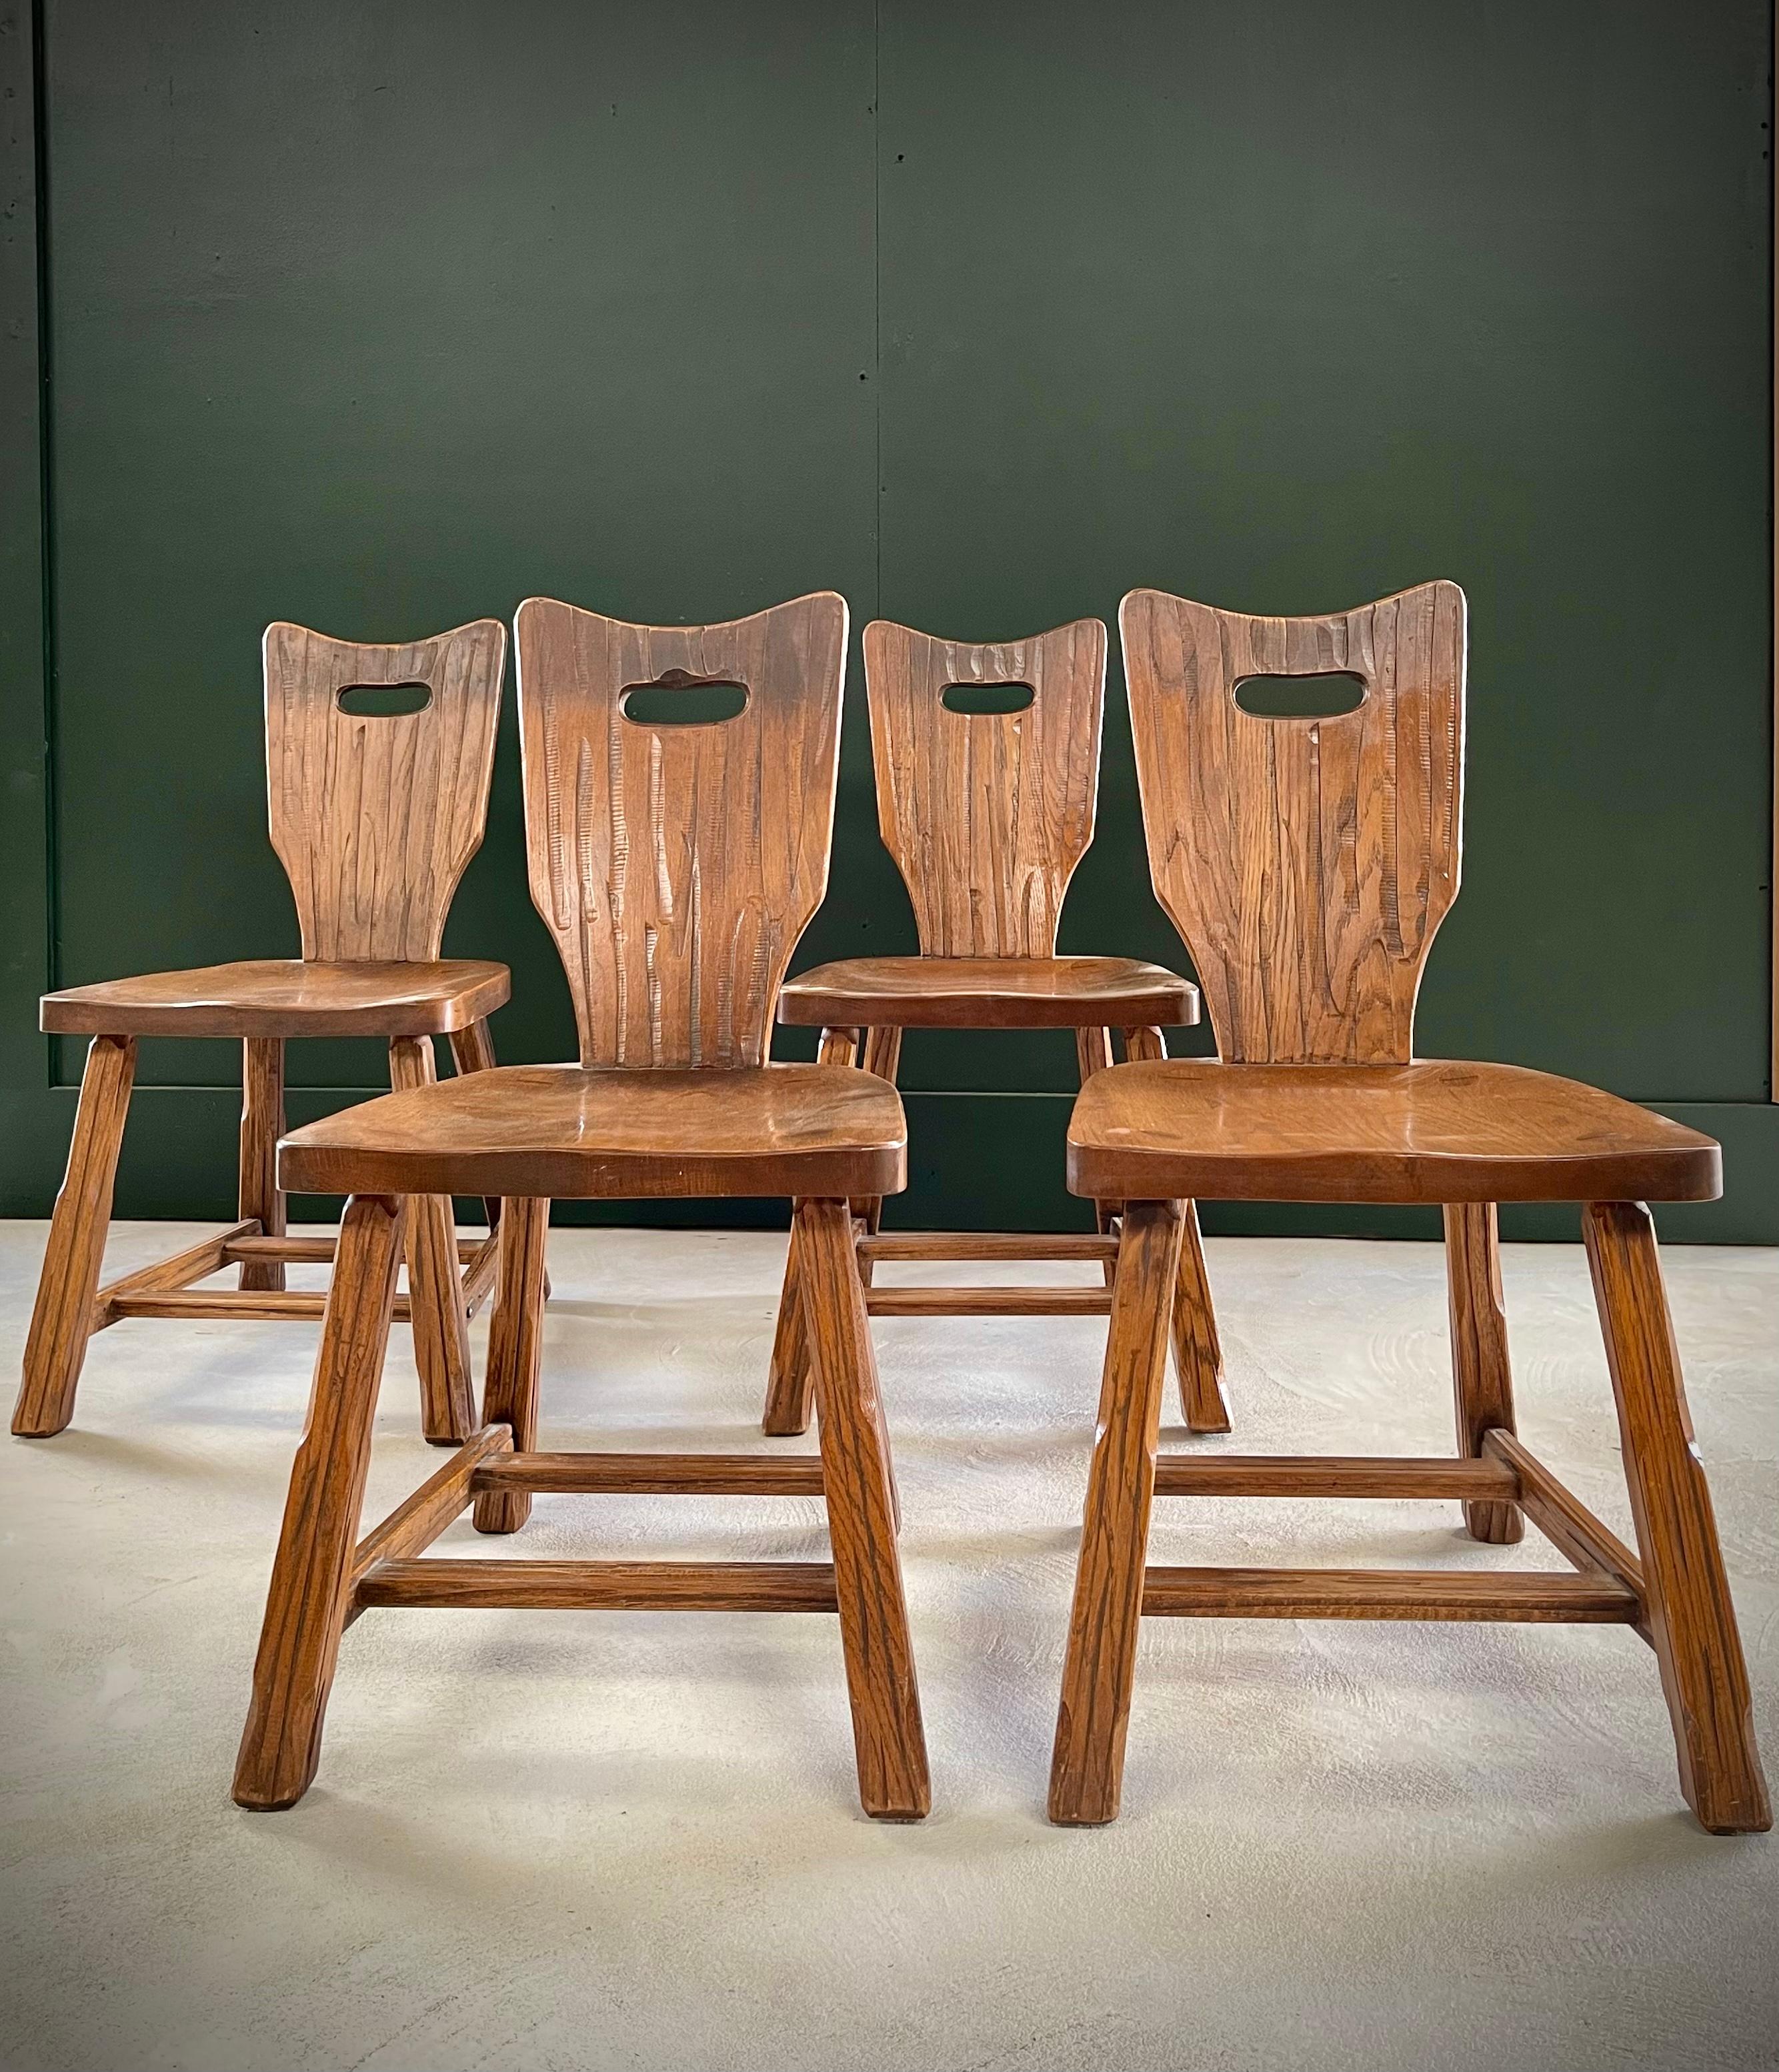 Add timeless appeal and the warmth of mid-century design with this set of four A. Brandt Ranch Oak dining chairs. Crafted with quality and style in mind, these iconic chairs effortlessly blend classic ranch aesthetics with mid-century modern flair.